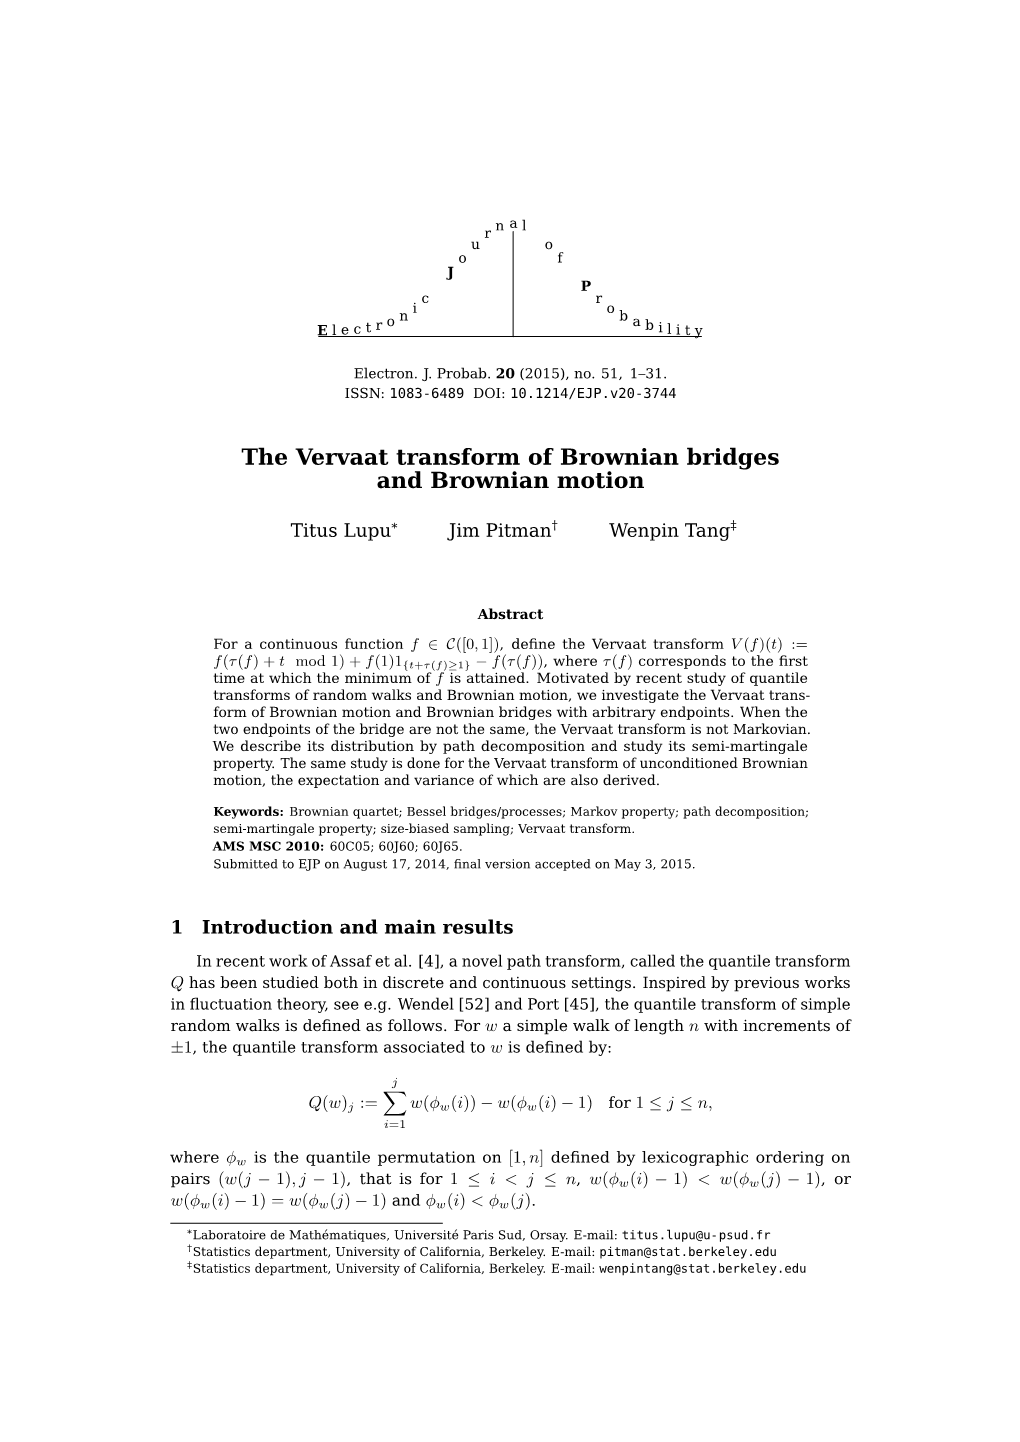 The Vervaat Transform of Brownian Bridges and Brownian Motion